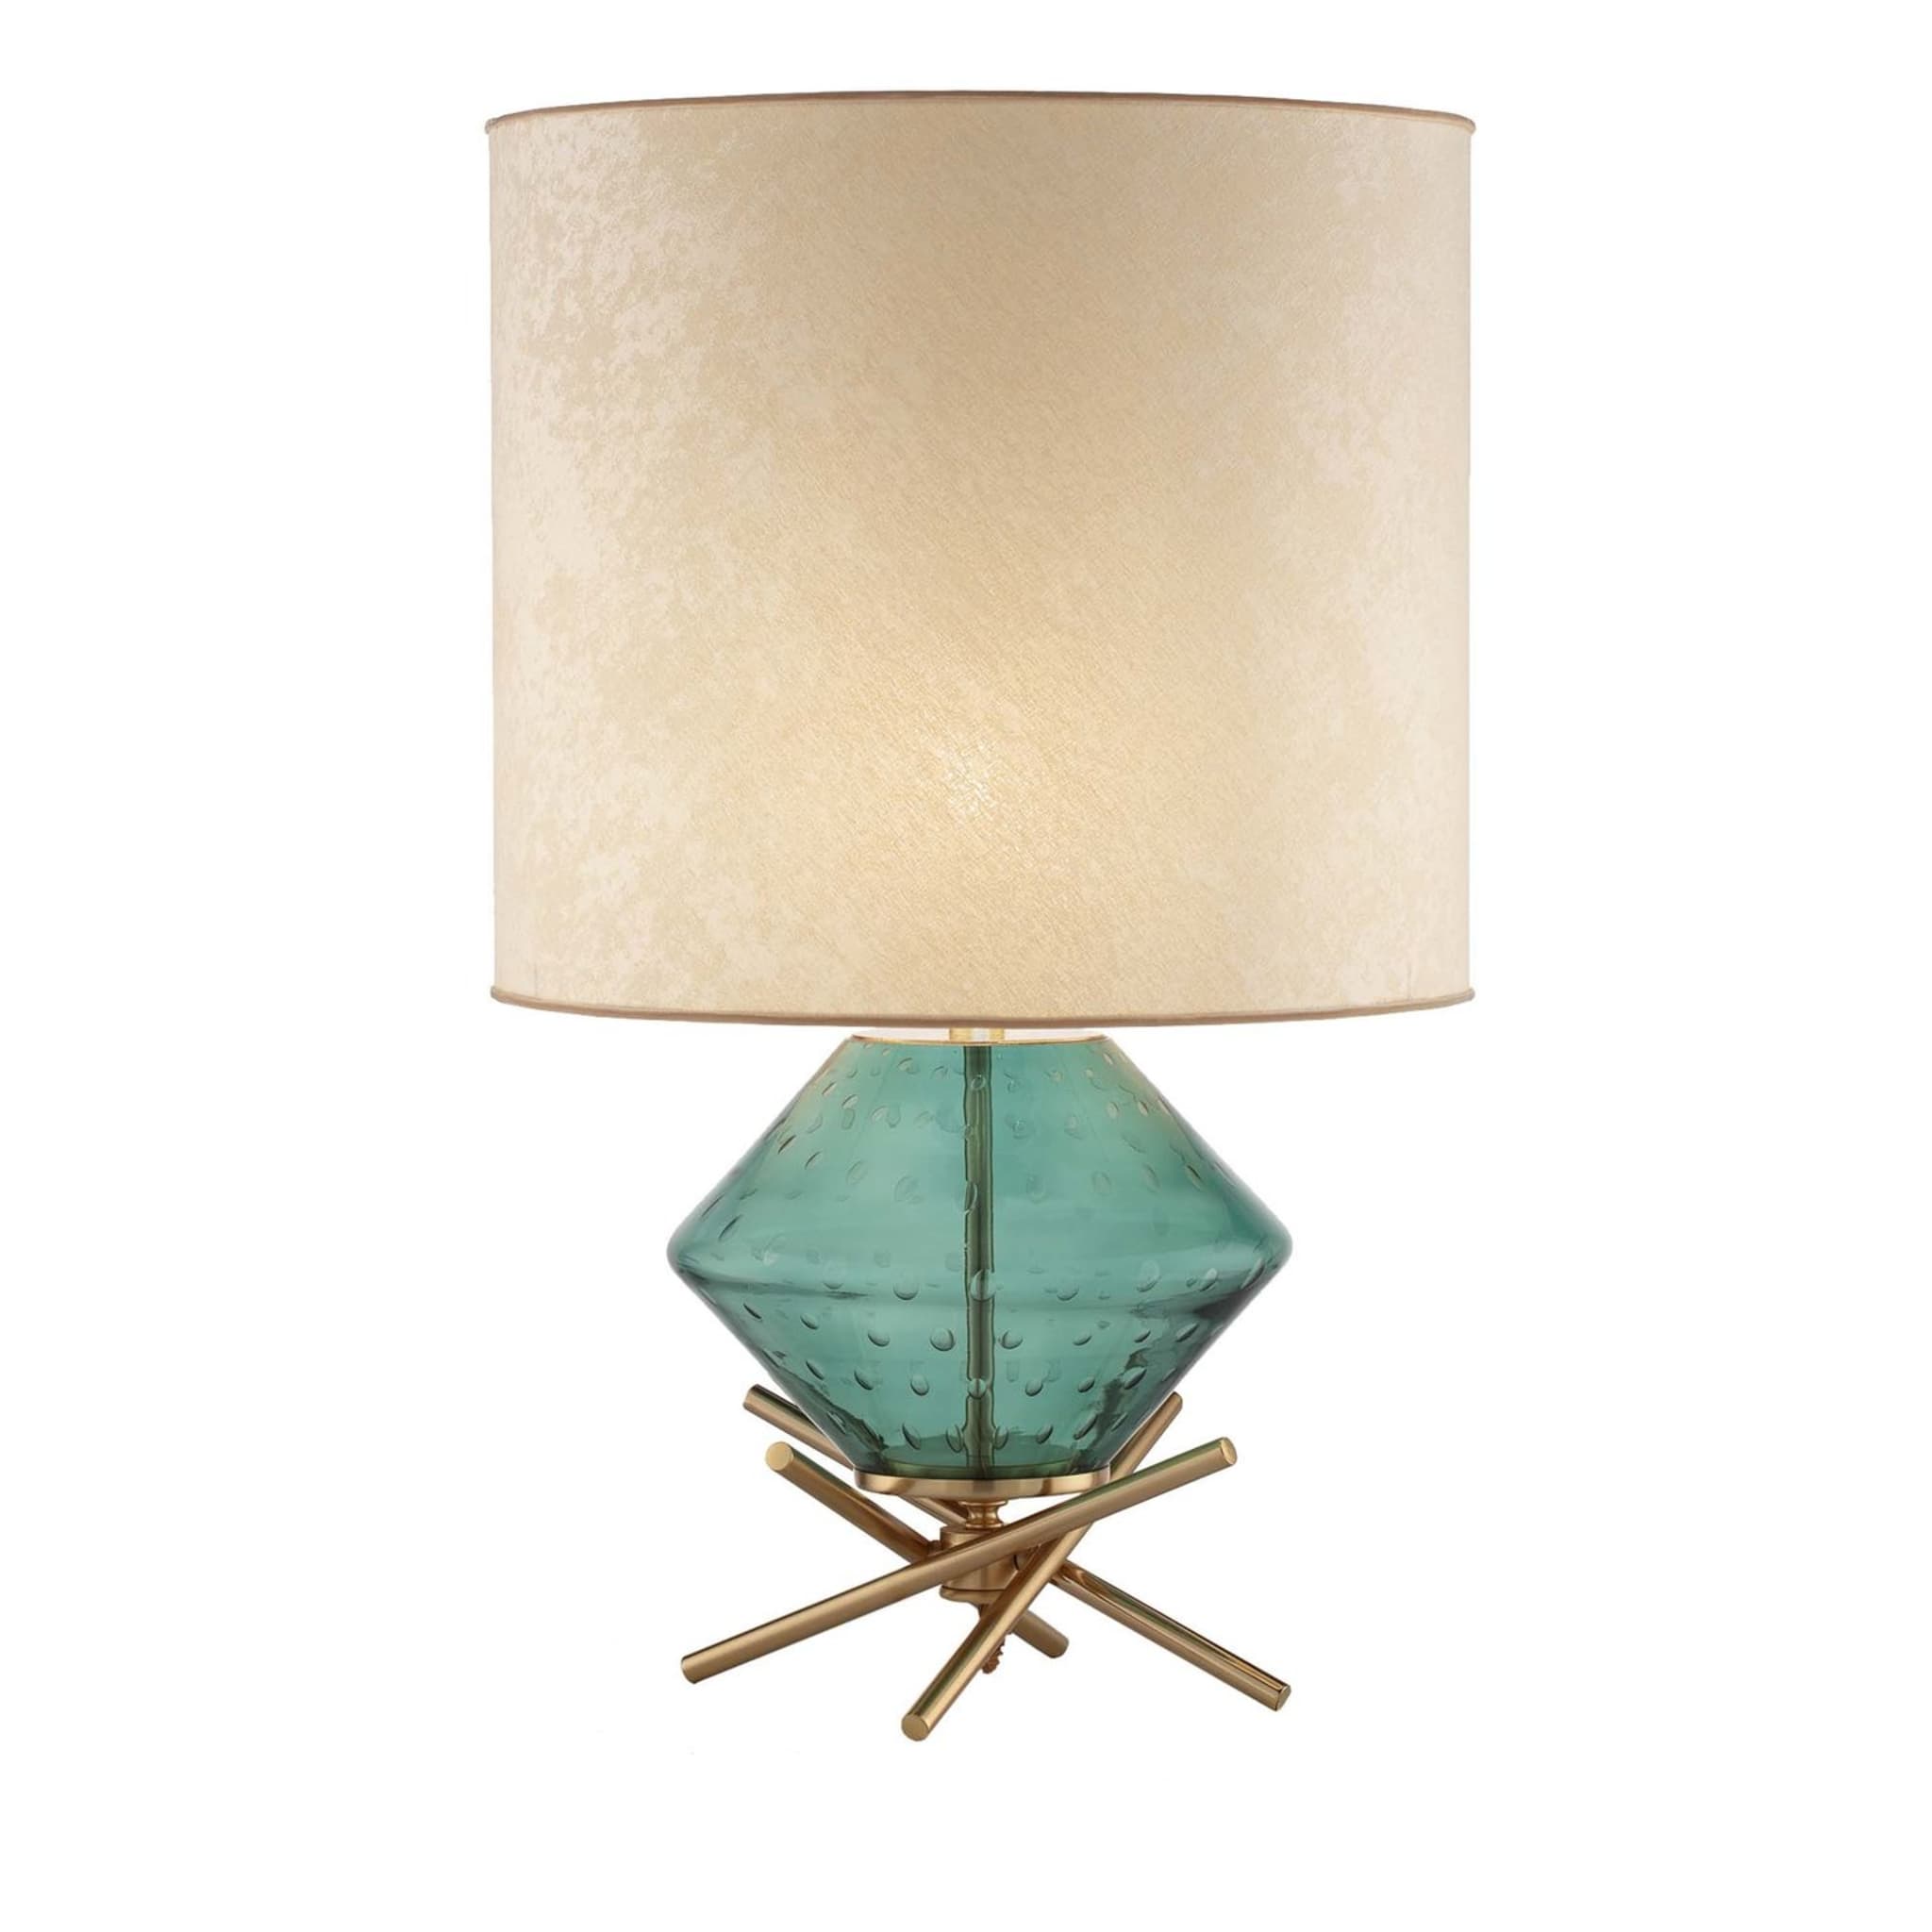 Sophie LG1 Table Lamp - Main view